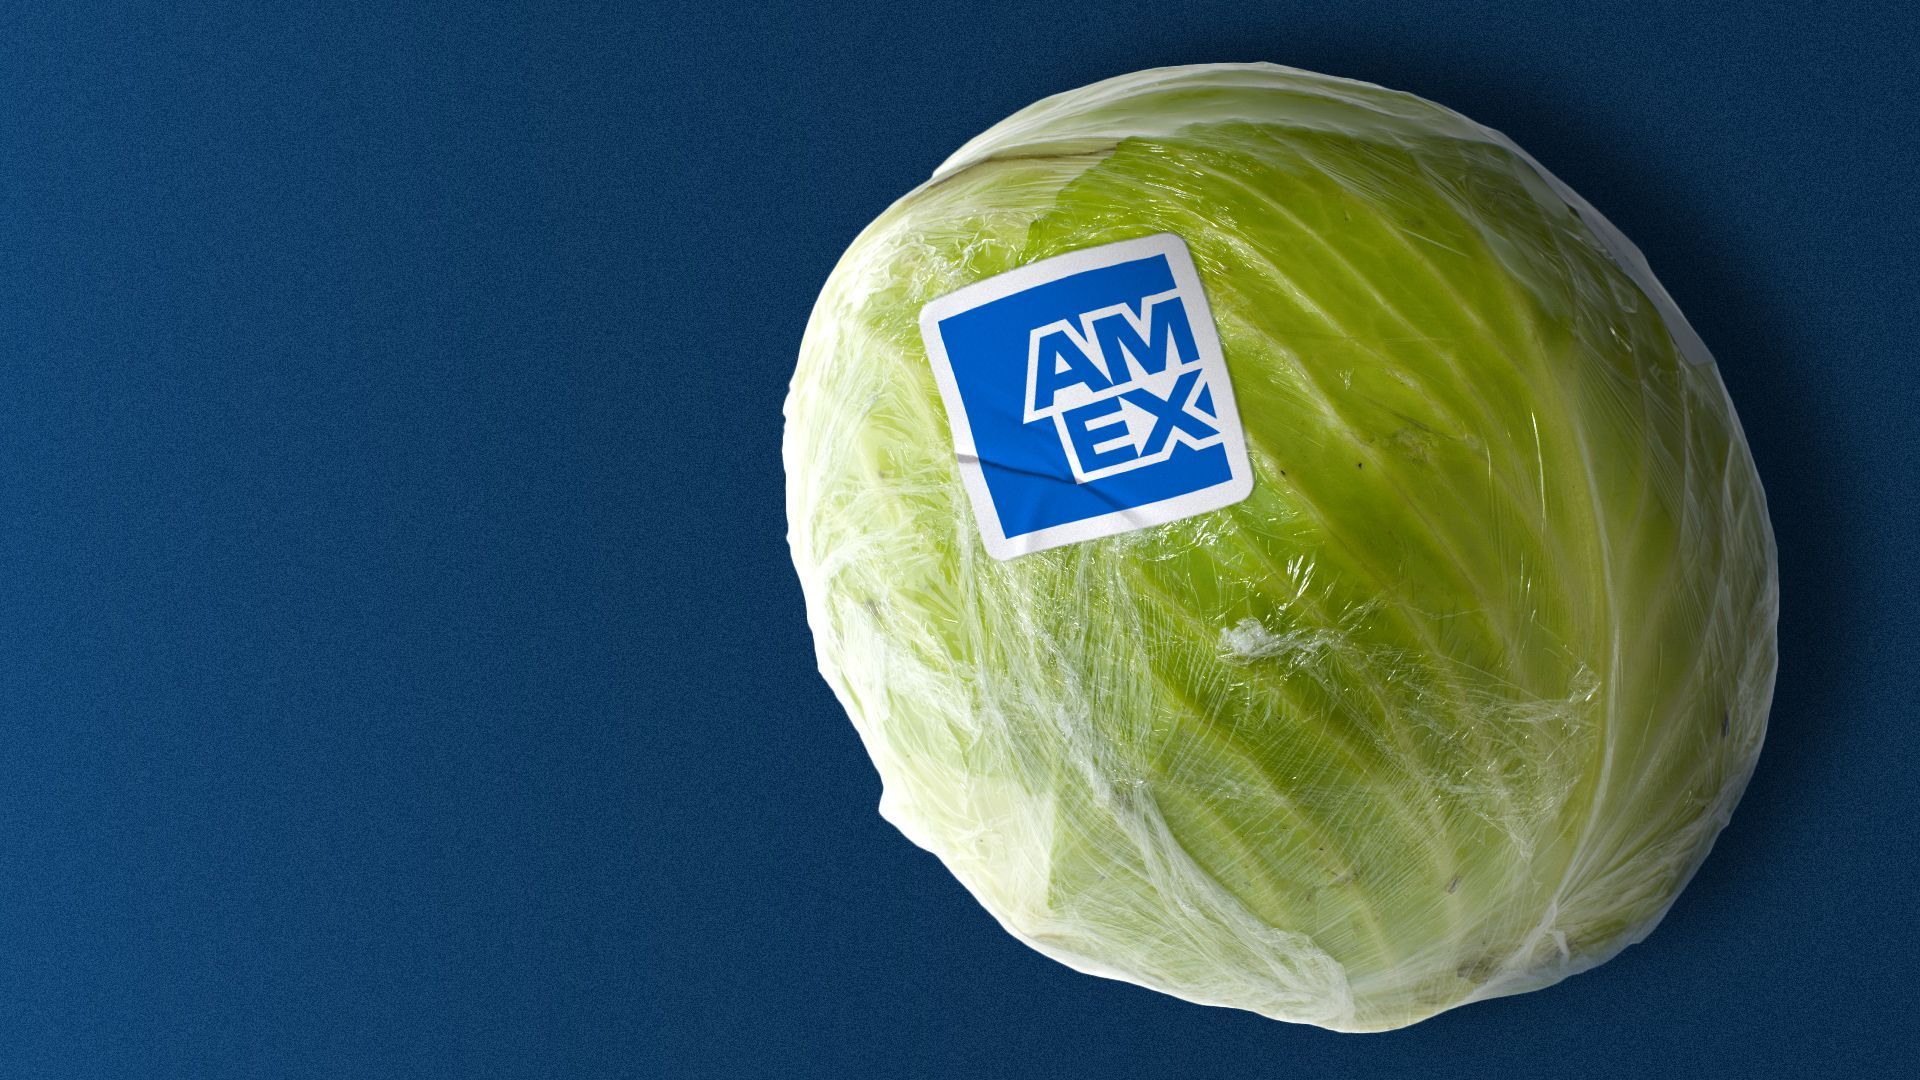 Illustration of a produce sticker with the American Express logo stuck on a head of cabbage.